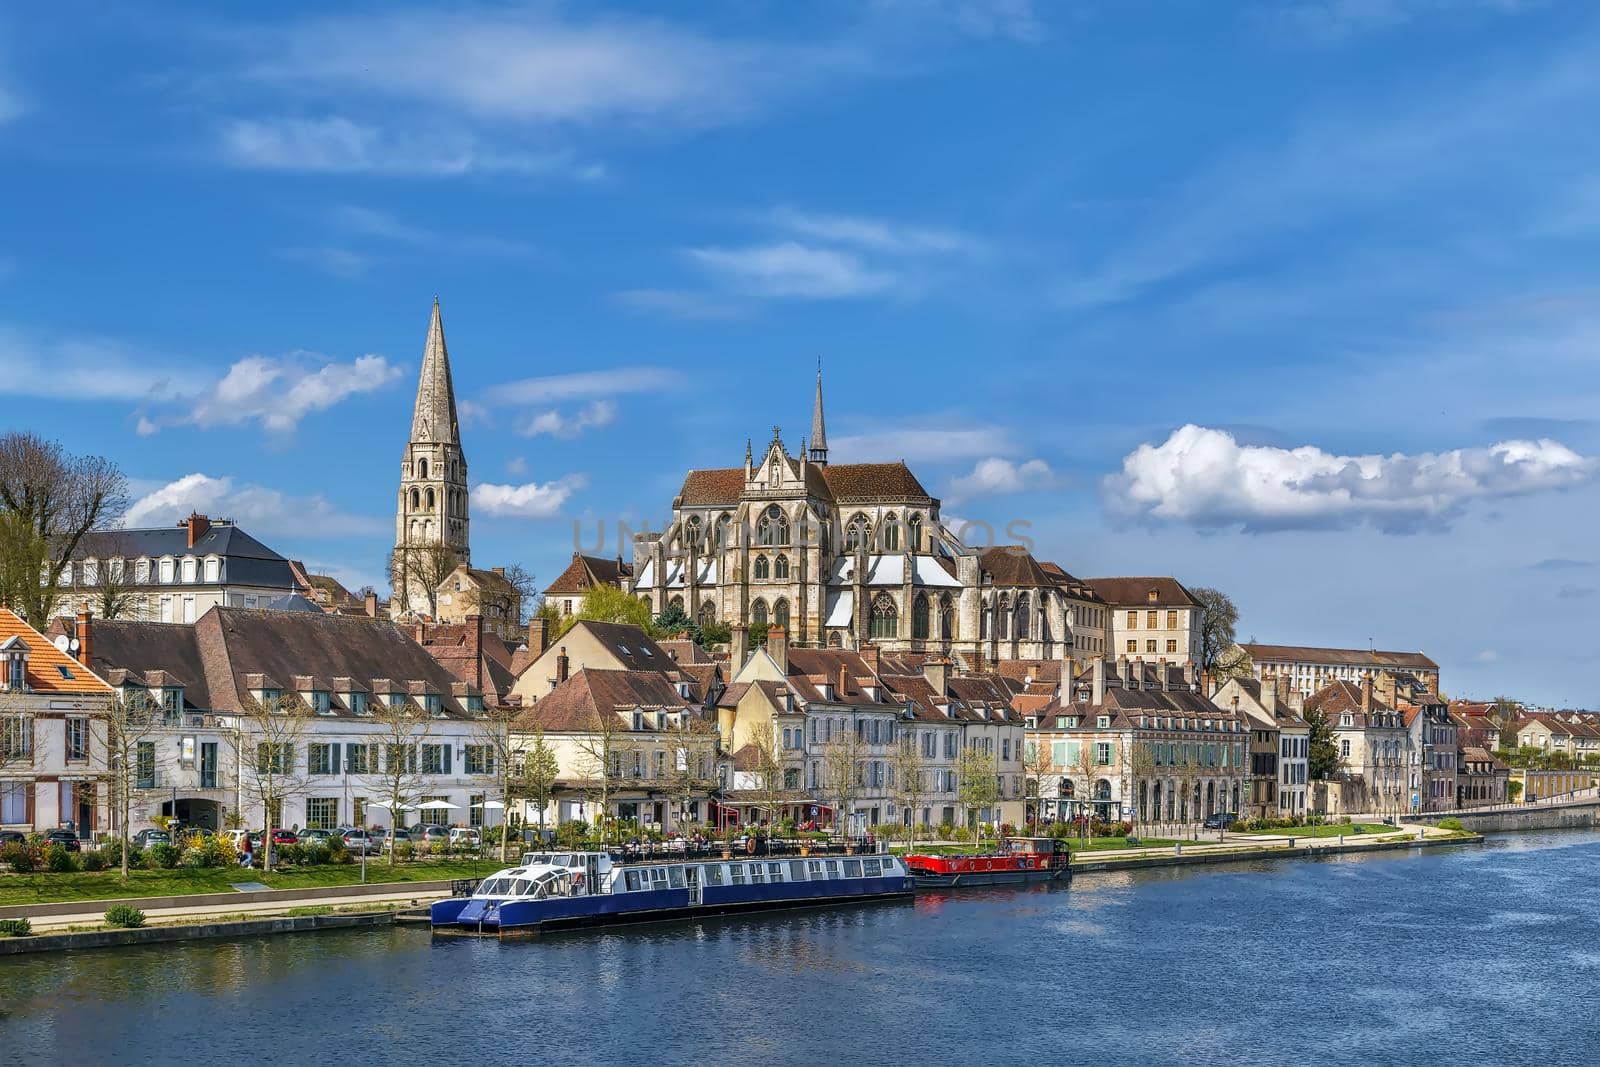 View of Abbey of Saint-Germain from Yonne river, Auxerre, France